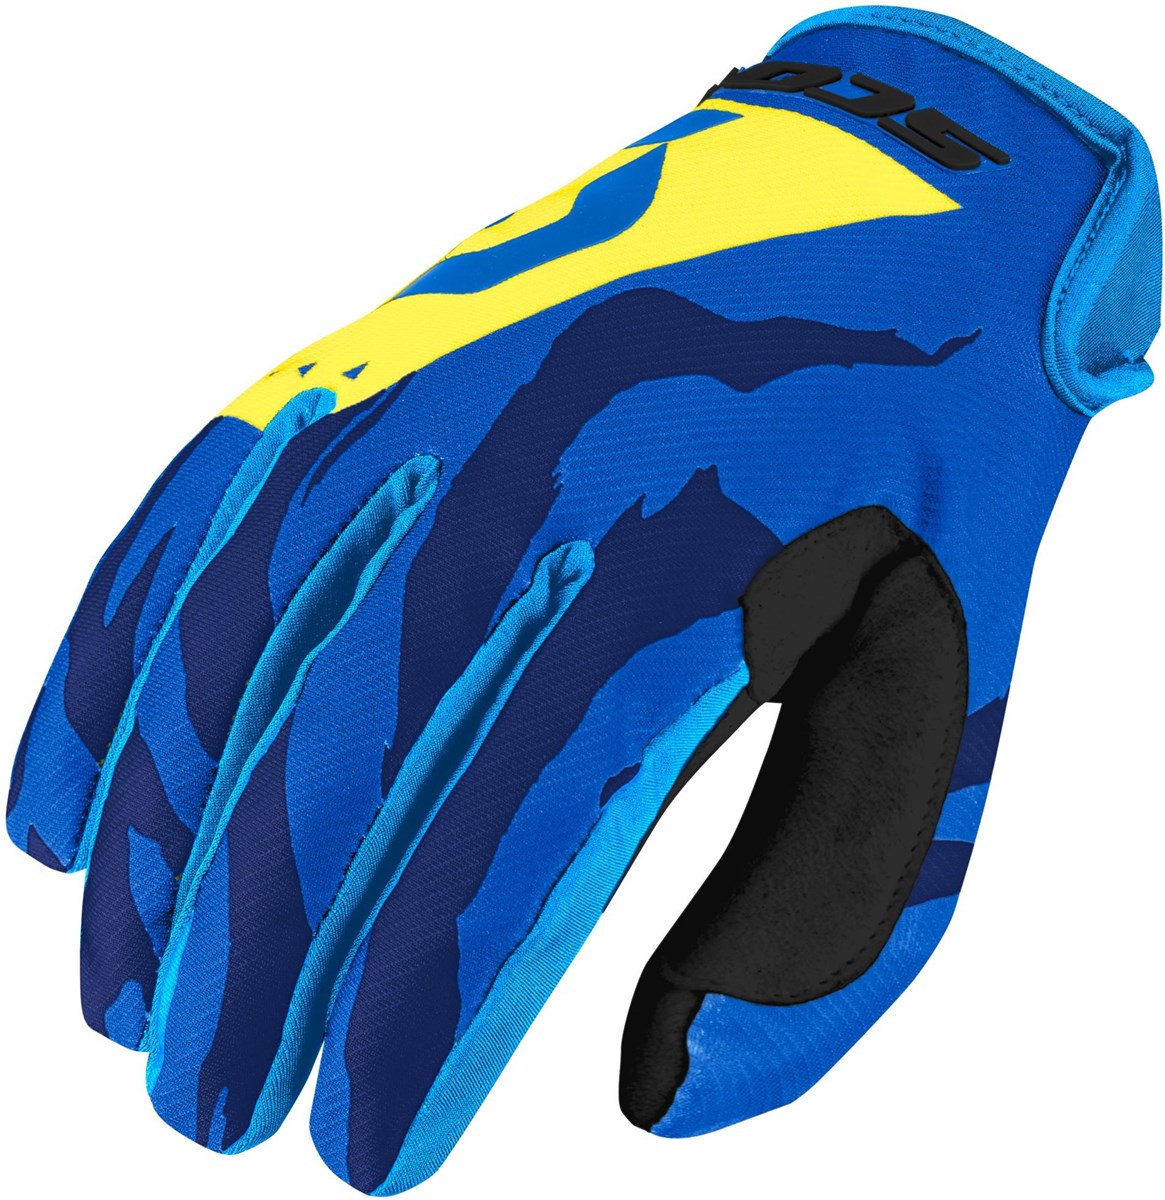 Scott 350 Race Long Finger Cycling Gloves product image